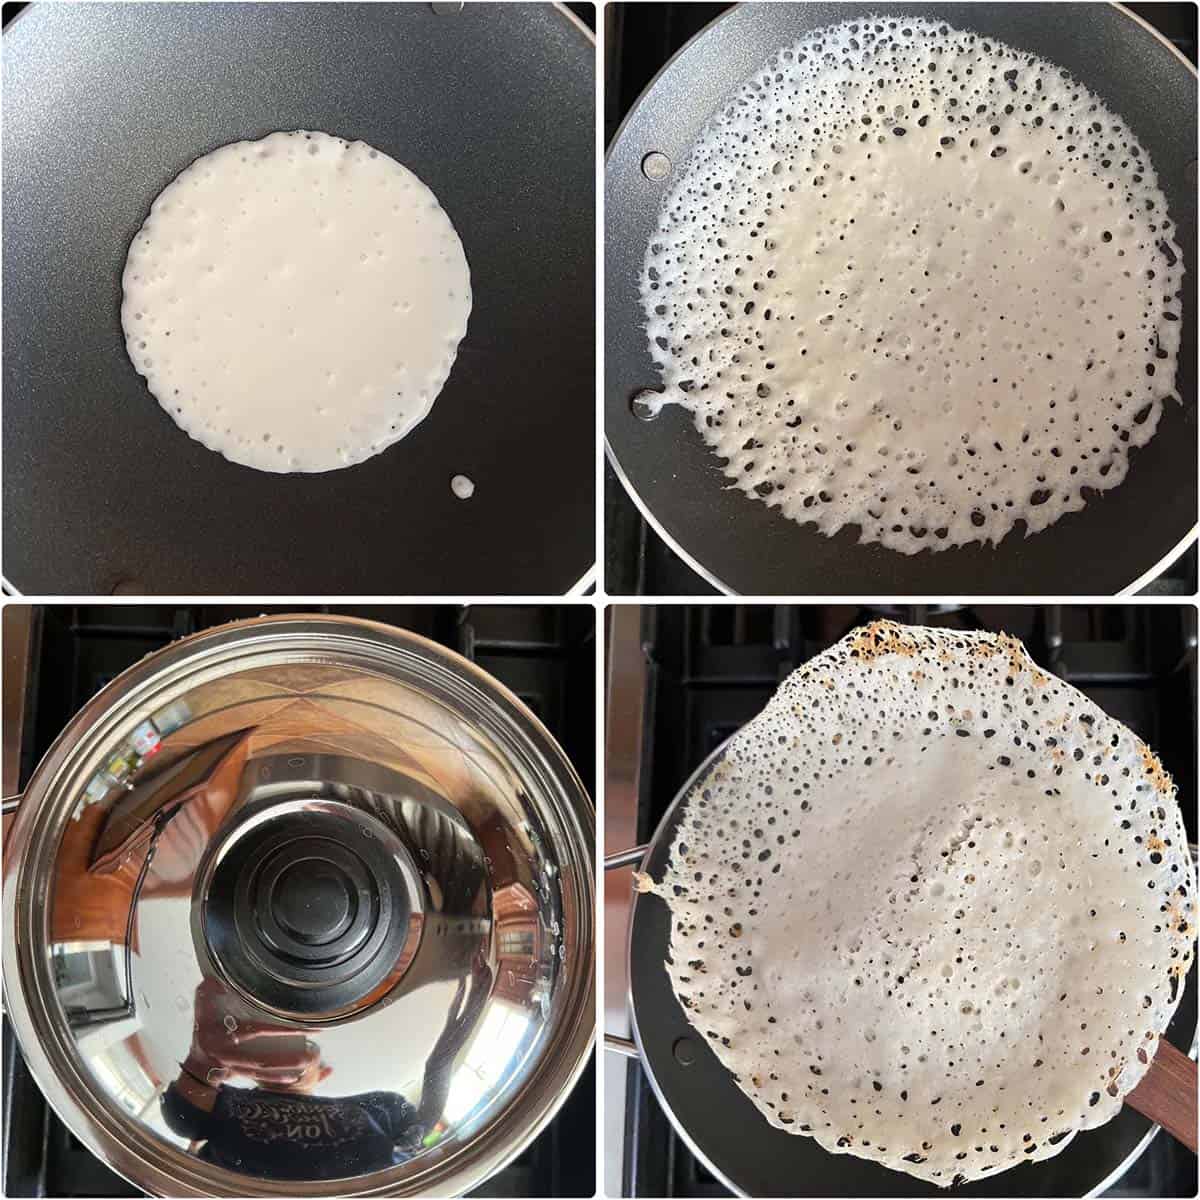 4 photo panel showing the making of appam in an nonstick pan.